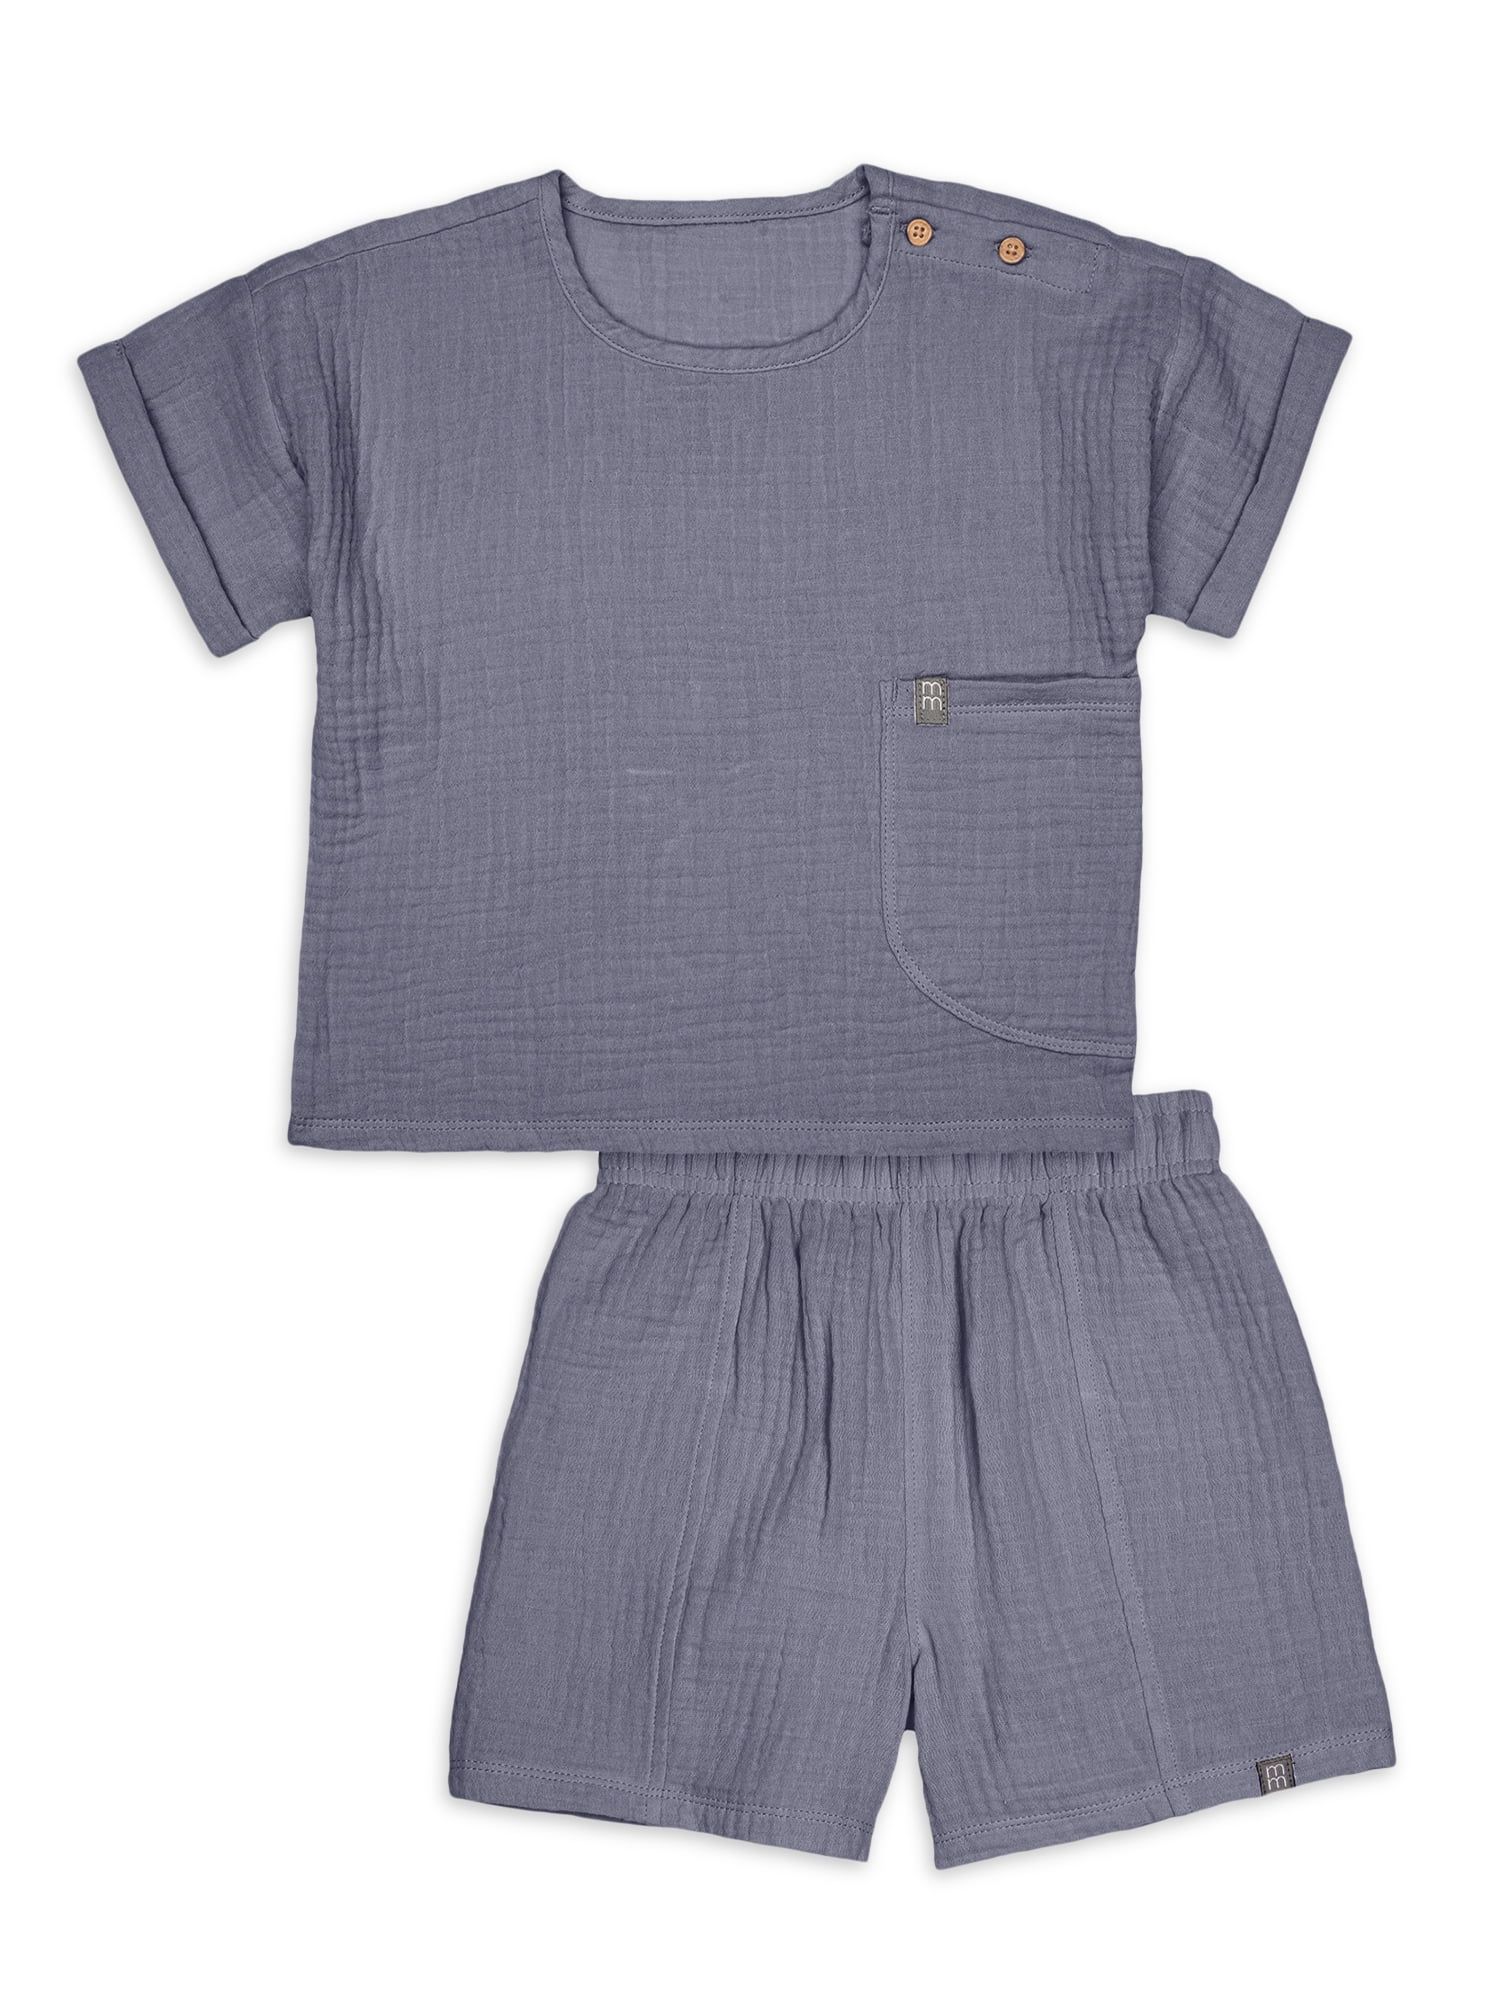 Modern Moments by Gerber Toddler Boy Casual Cotton Gauze Outfit Set, Sizes 12M-5T | Walmart (US)